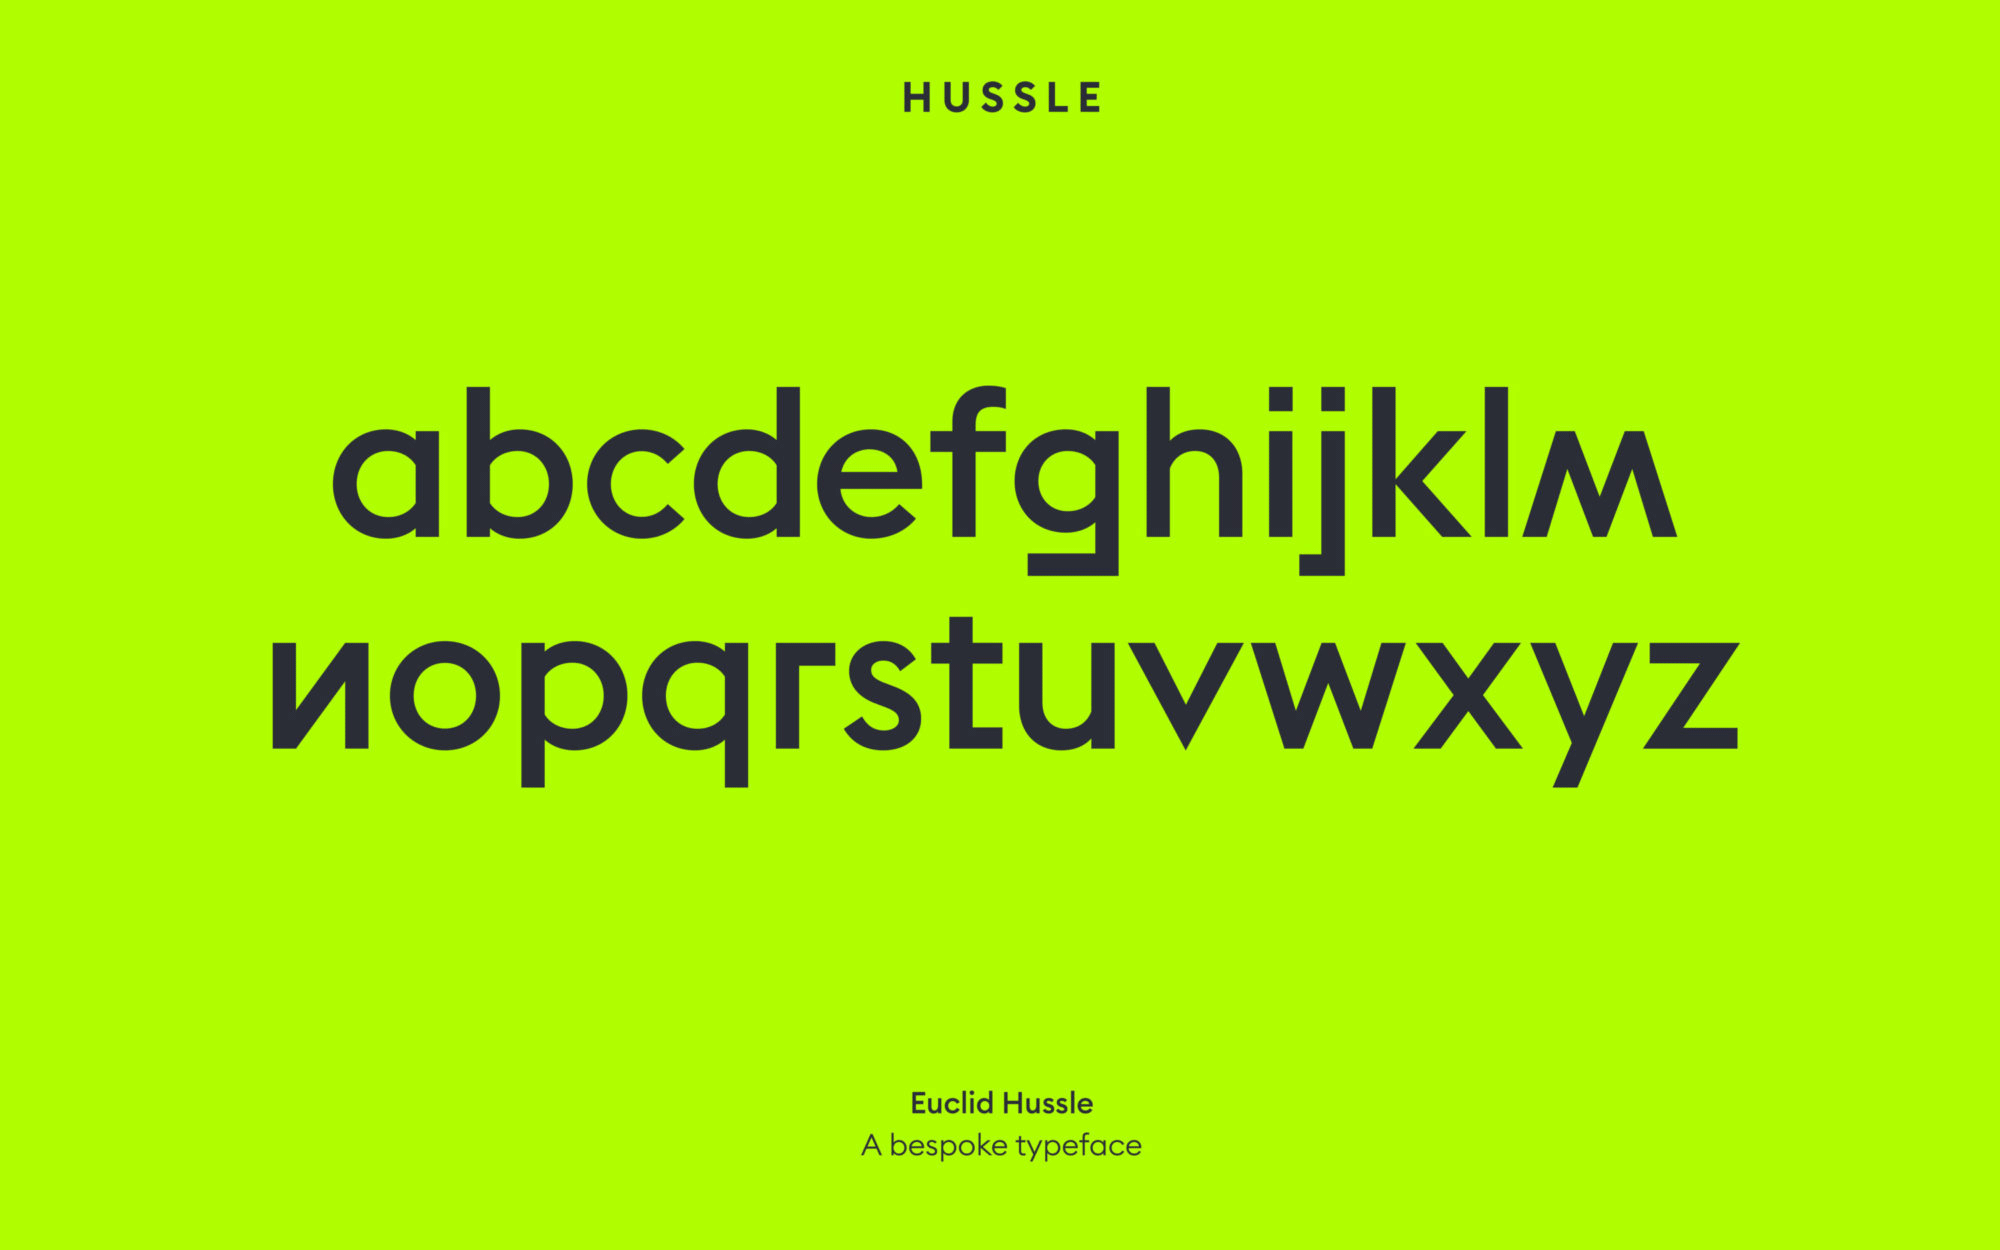 New Name, Logo, and Identity for Hussle by Onwards